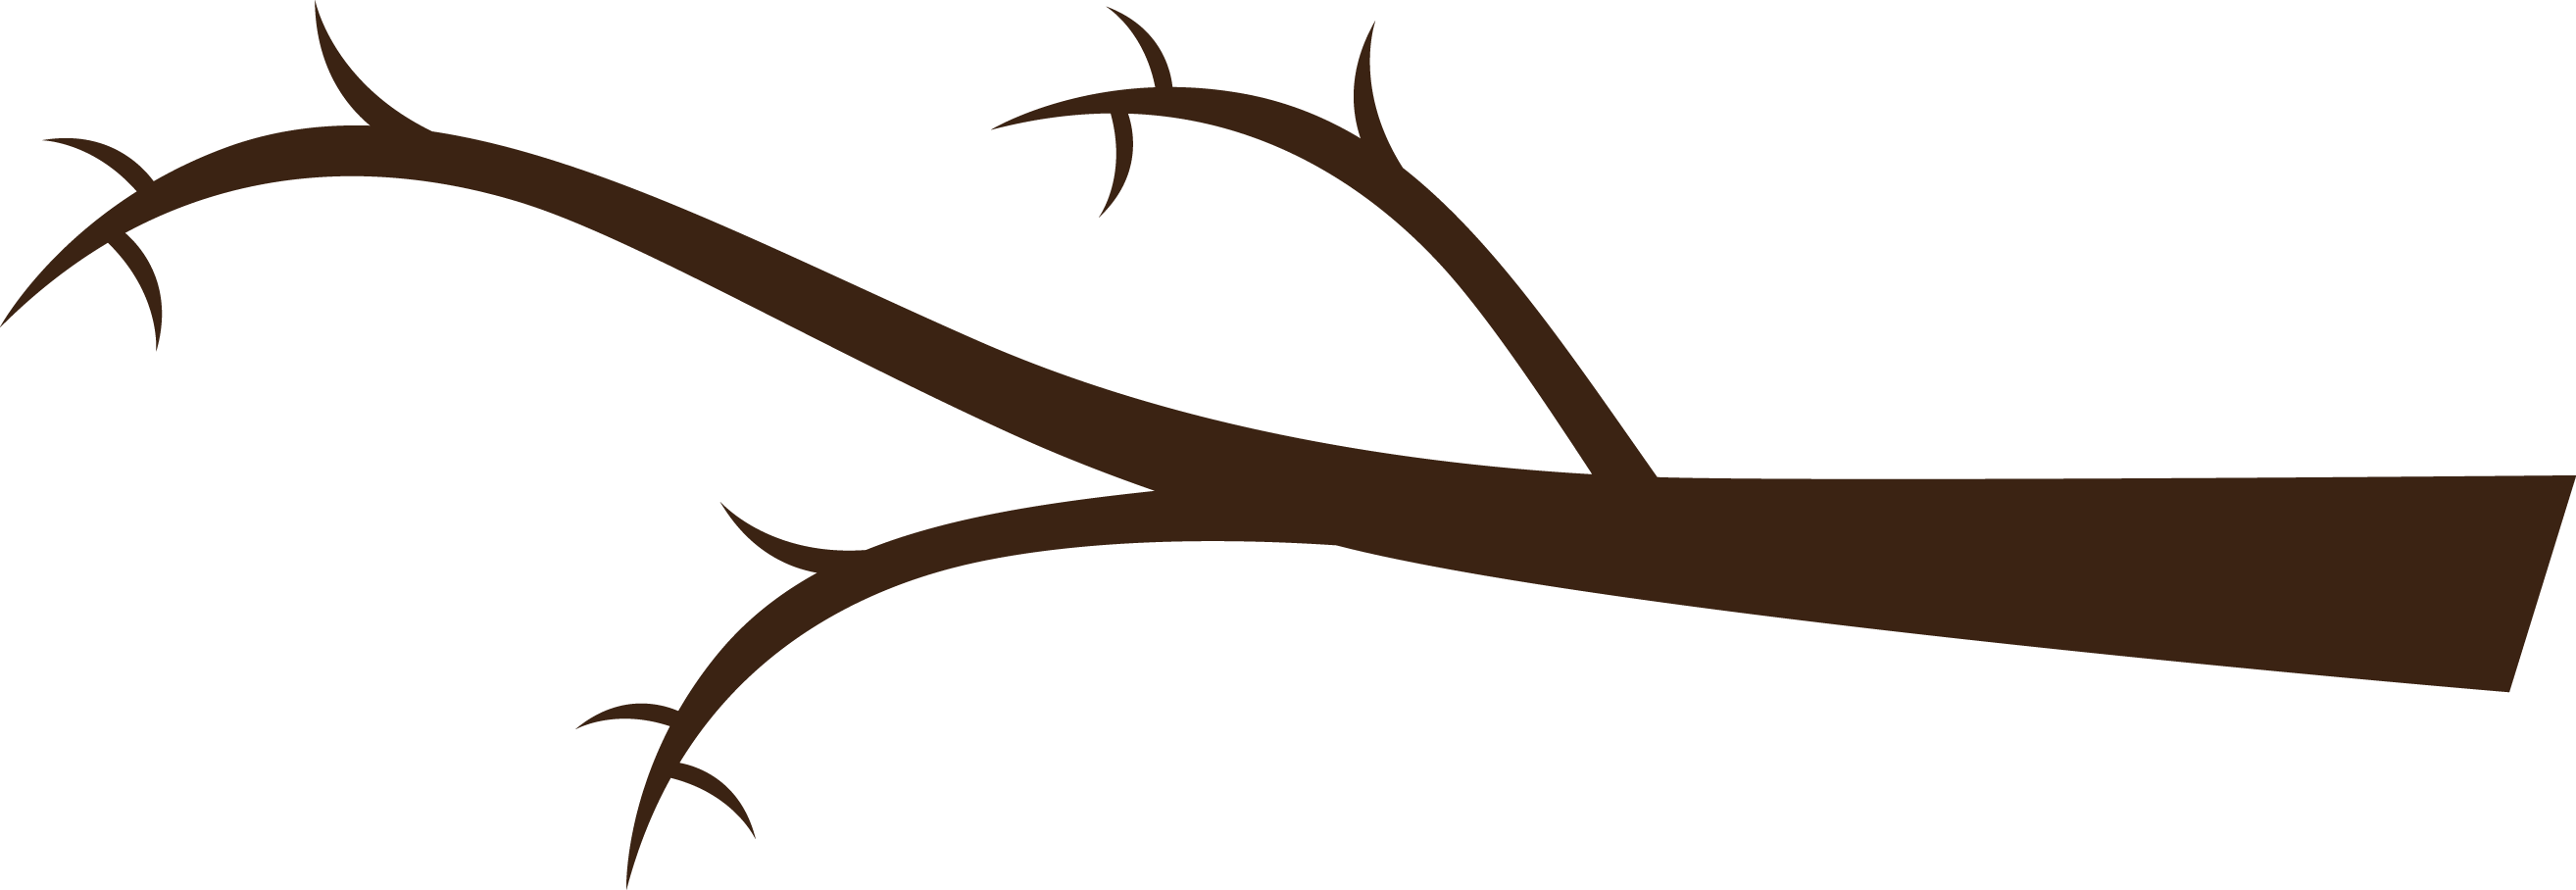 Silhouetted Tree Branchwith Thorns PNG image